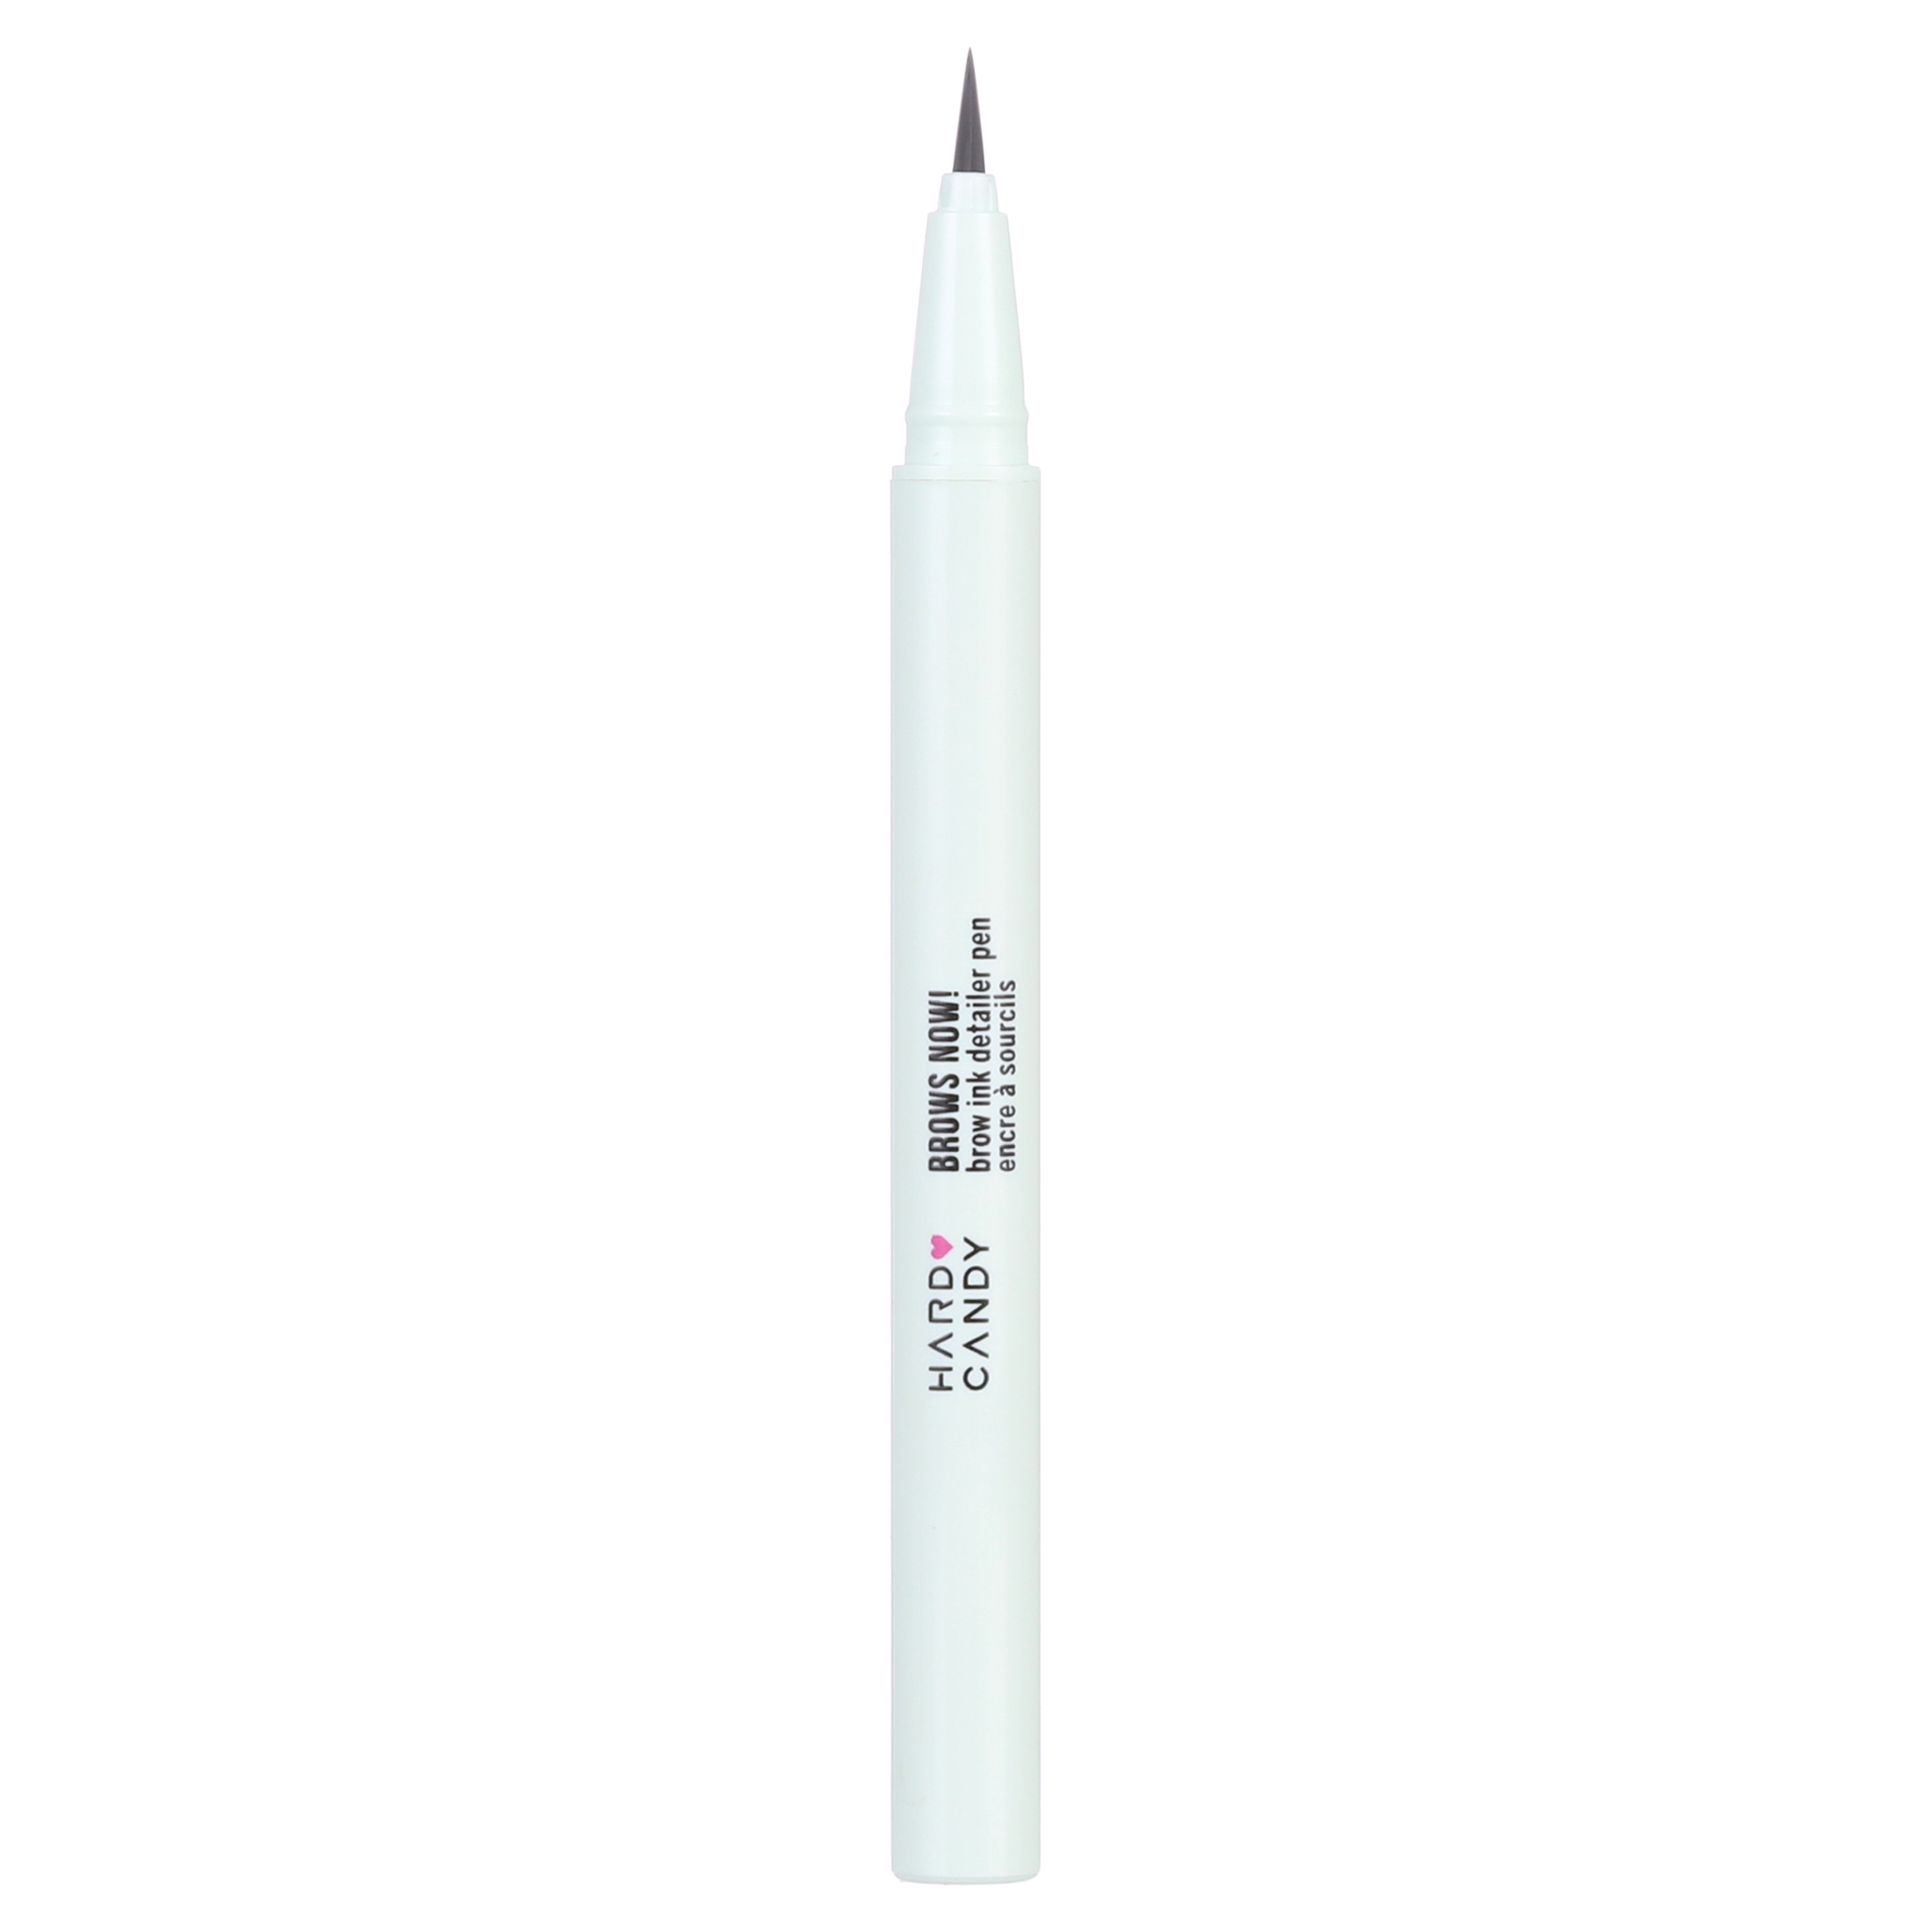 Hard Candy Brows Now! Precision Tip Brow Ink Medium/Dark - image 4 of 7